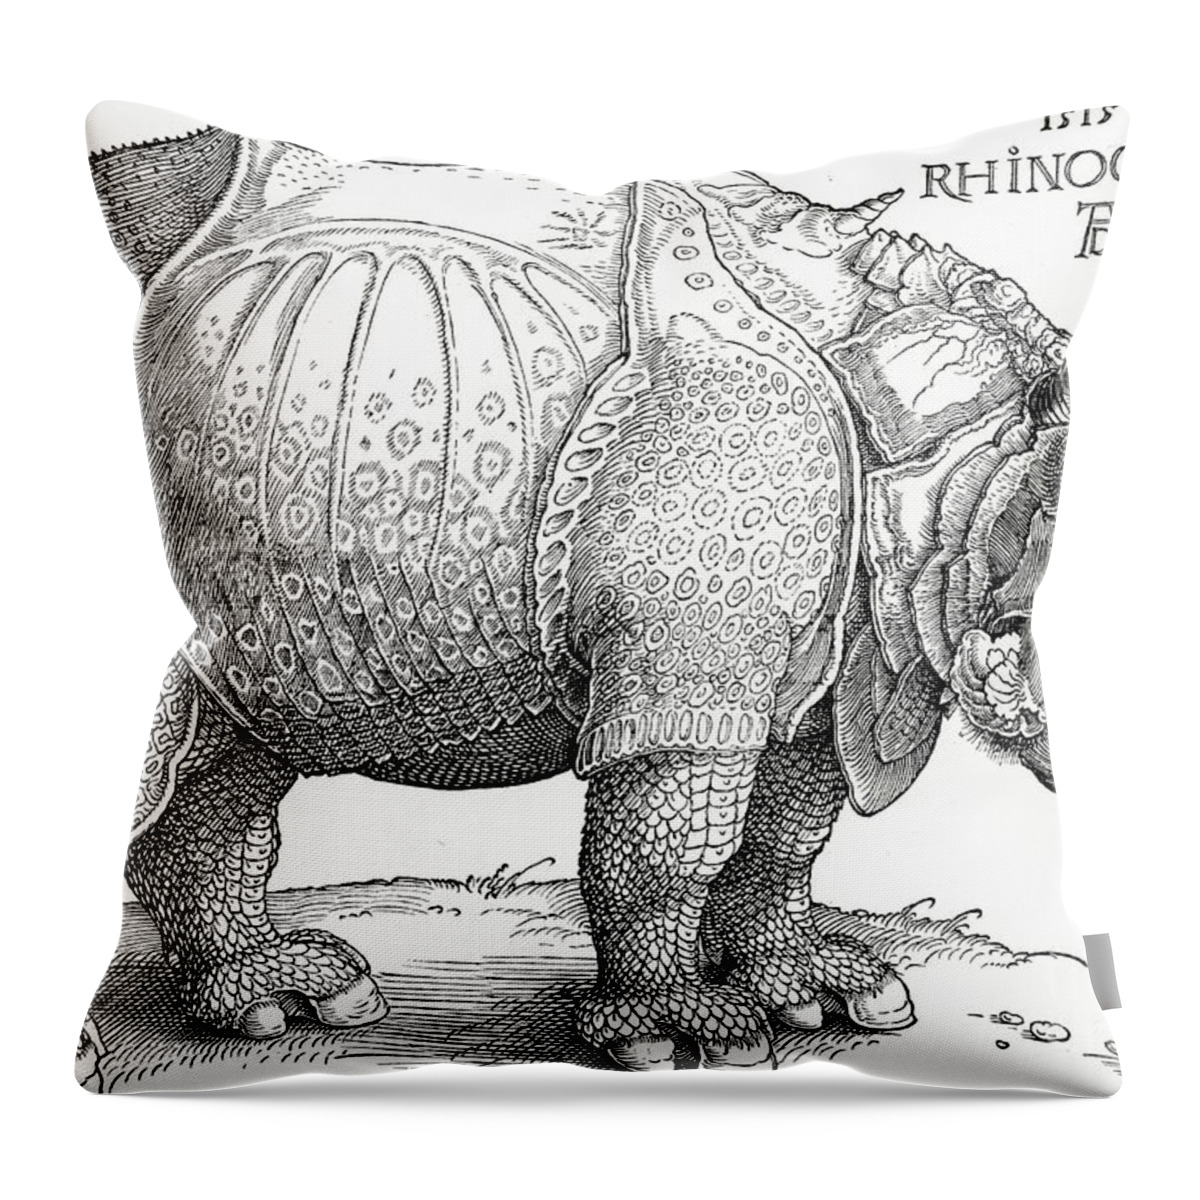 Rhino Throw Pillow featuring the drawing The Rhinoceros by Albrecht Durer